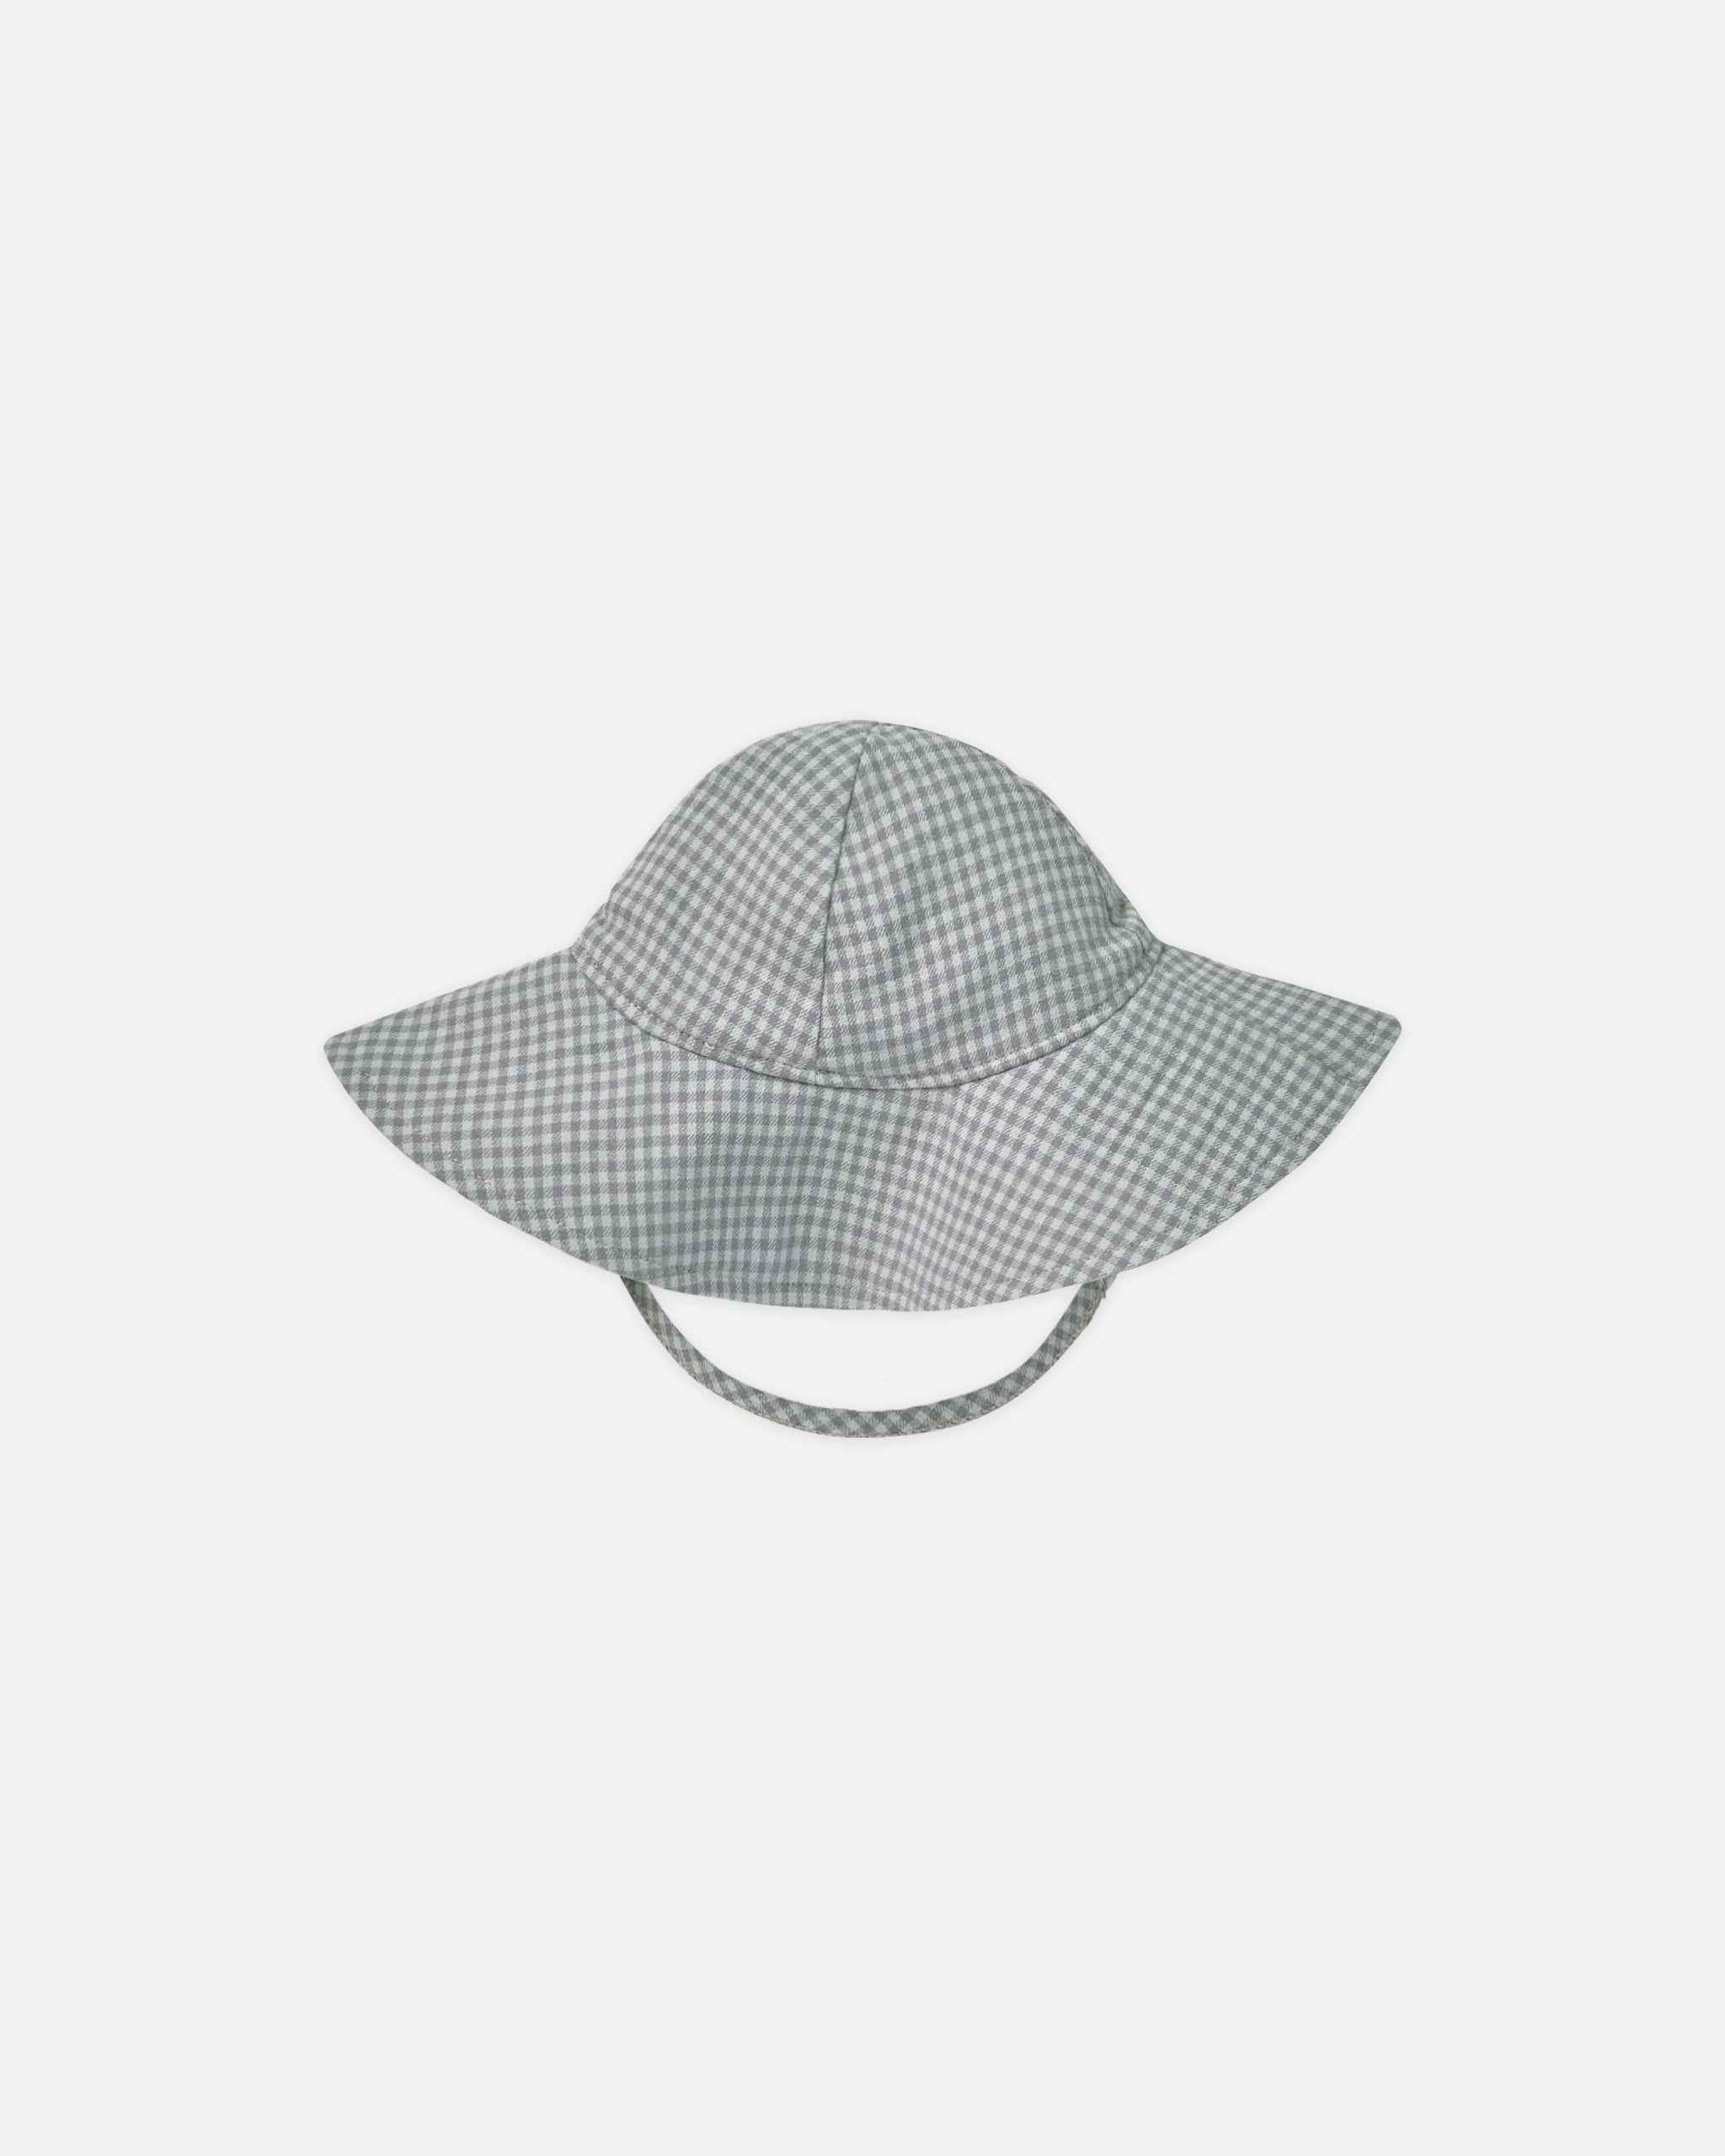 Woven Sun Hat || Blue Gingham - Rylee + Cru | Kids Clothes | Trendy Baby Clothes | Modern Infant Outfits |